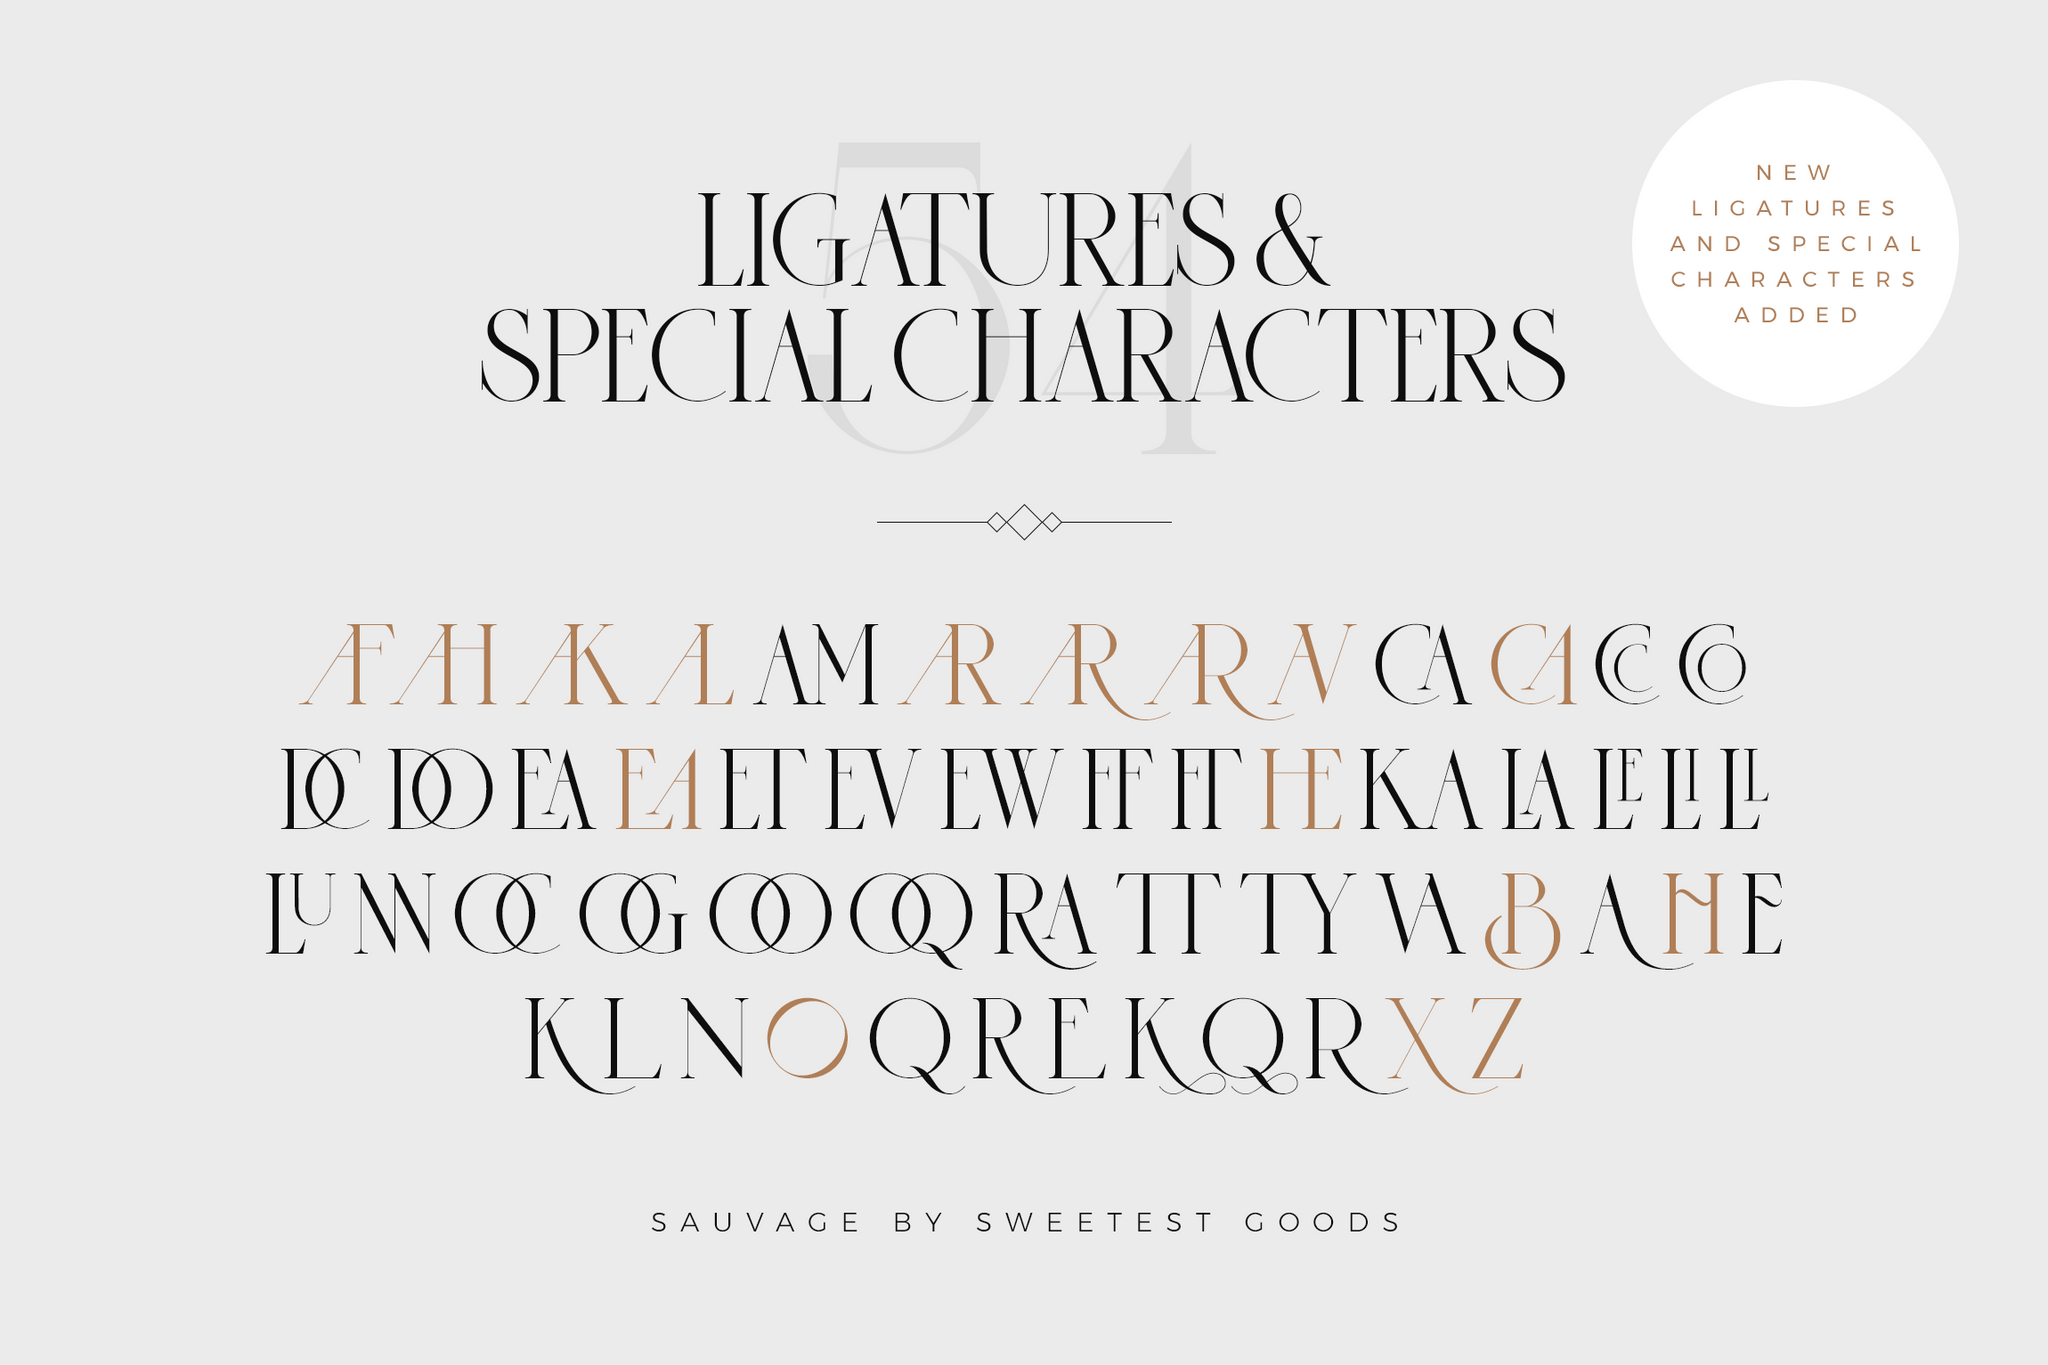 Ligatures & Alternate Characters - Sauvage Art Deco Font by Sweetest Goods